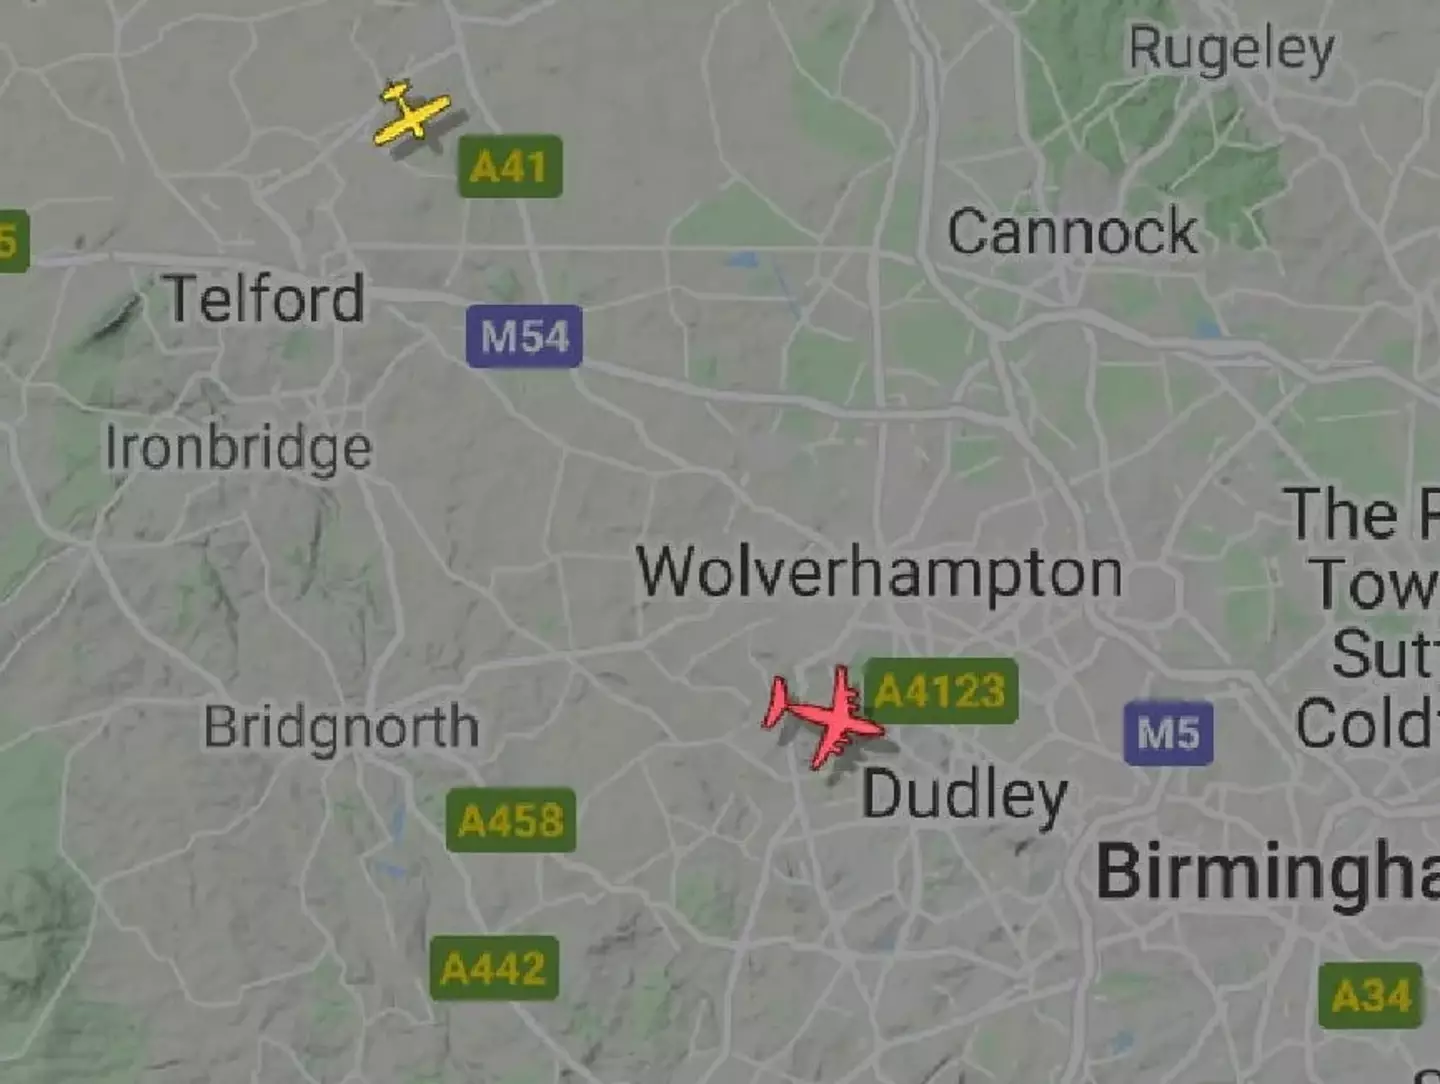 If a plane is red on FlightRadar that means something is going wrong.